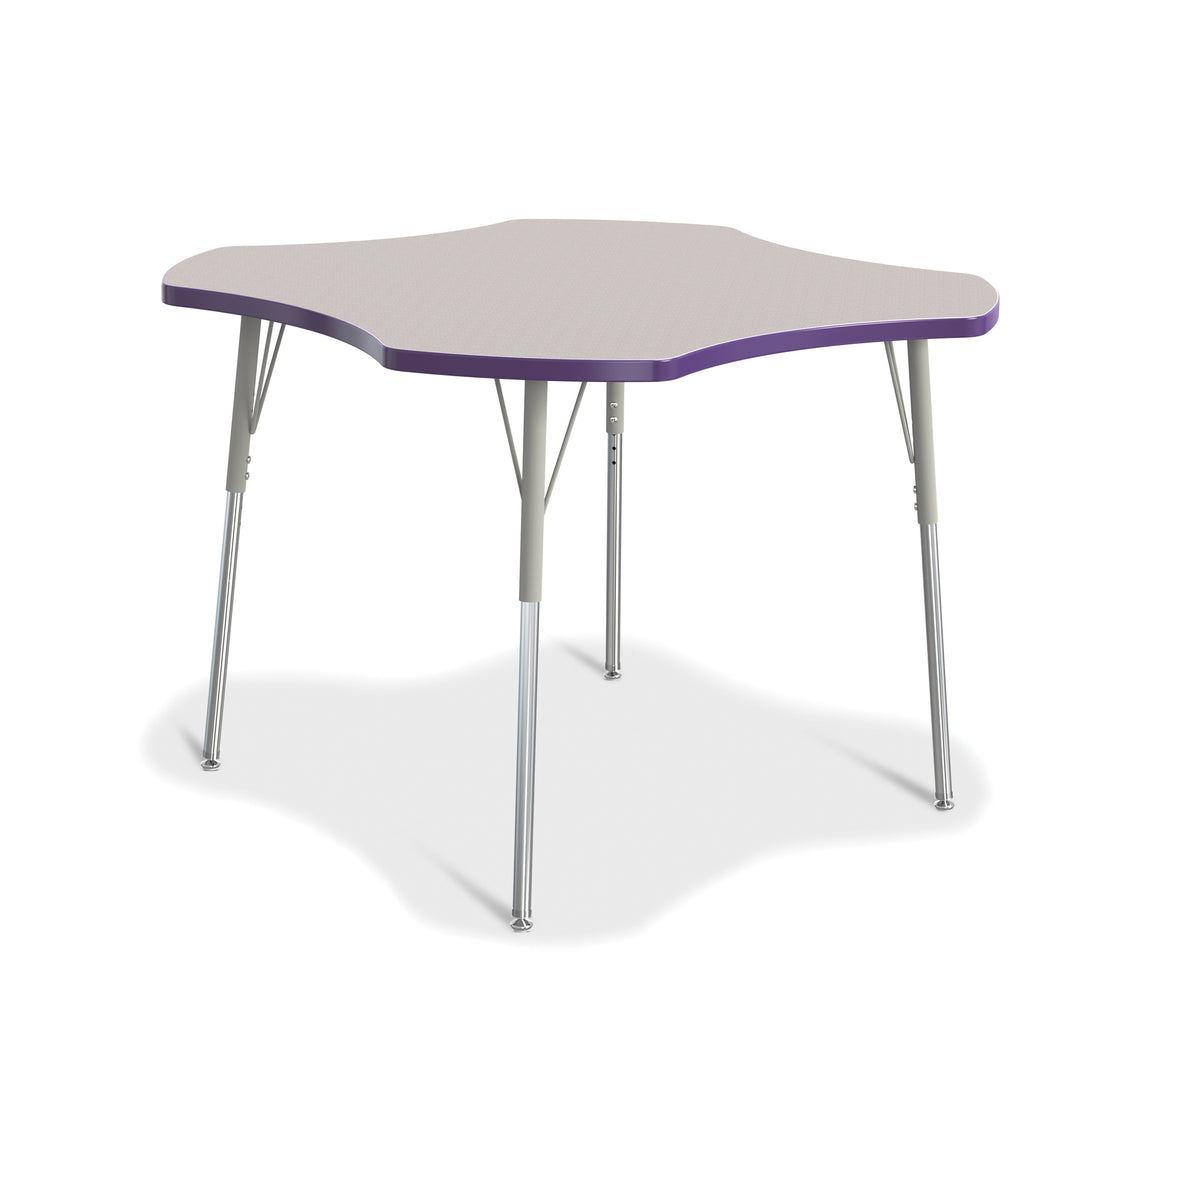 6453JCA004, Berries Four Leaf Activity Table, A-height - Freckled Gray/Purple/Gray